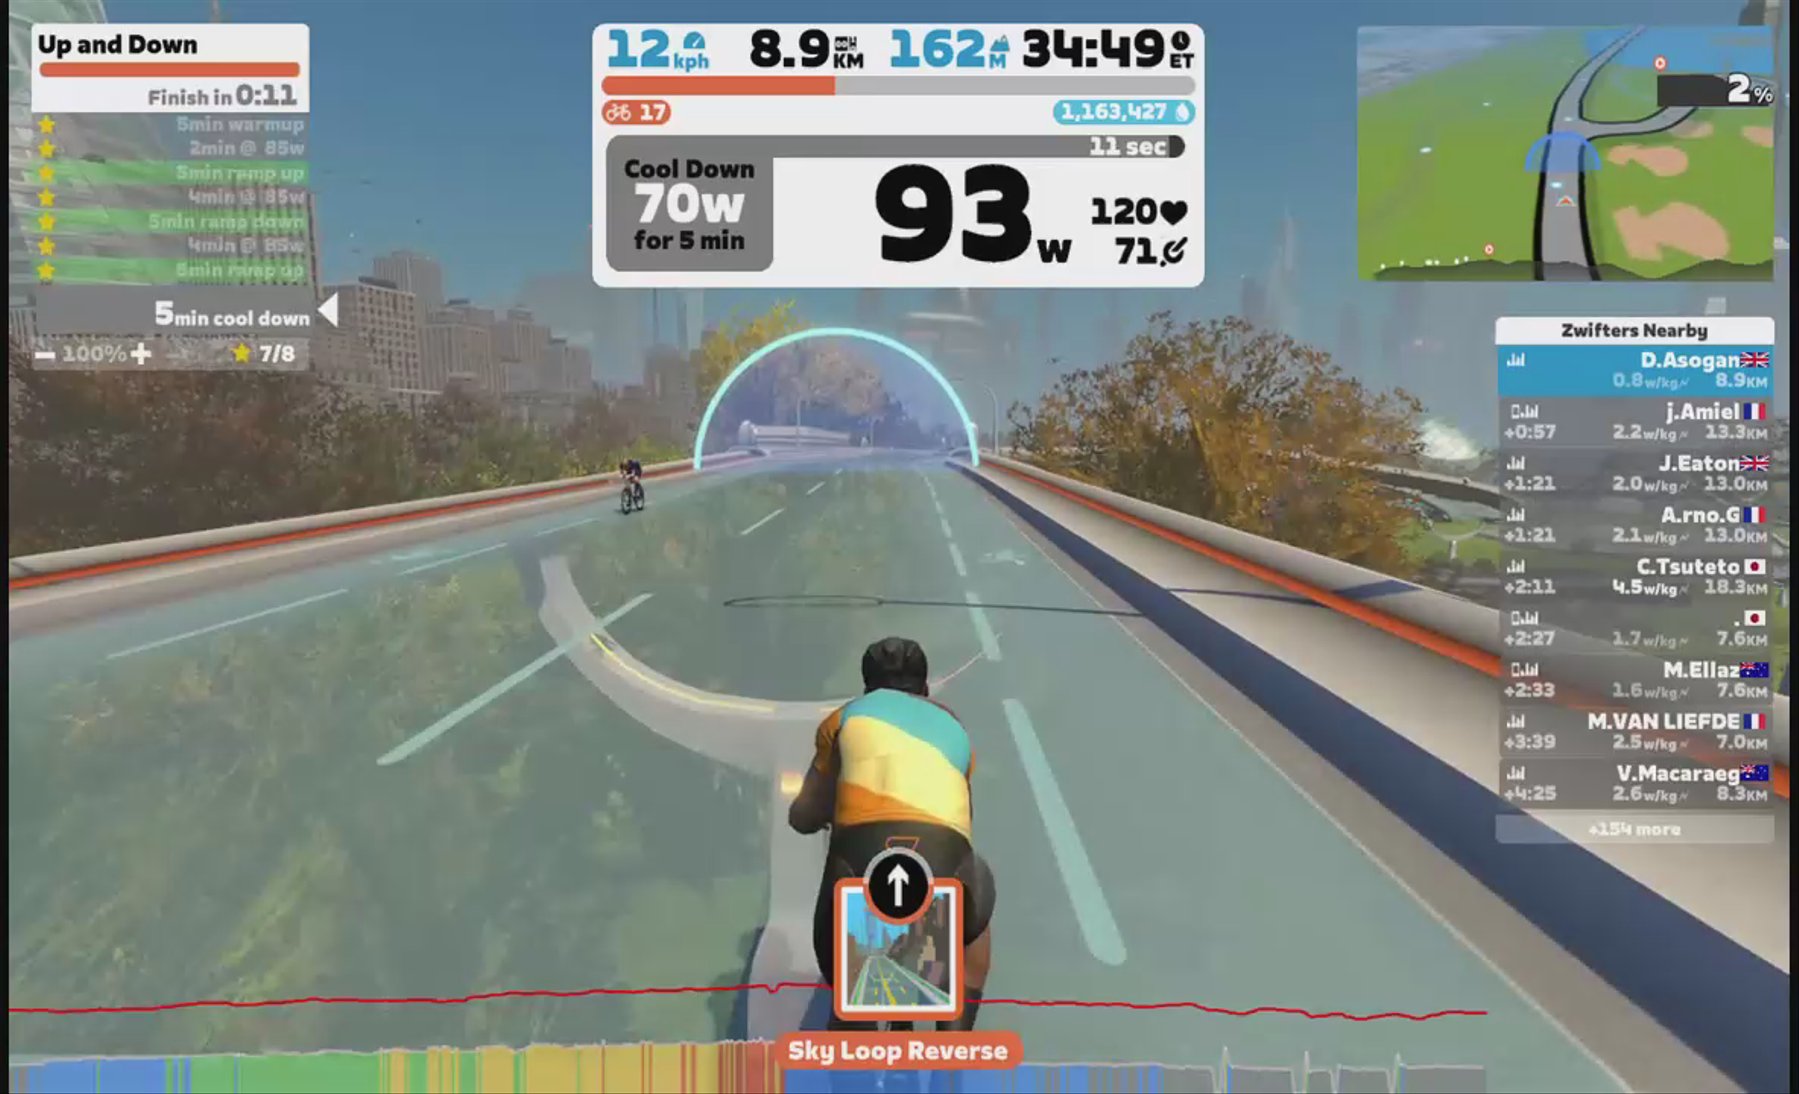 Zwift - Up and Down in New York